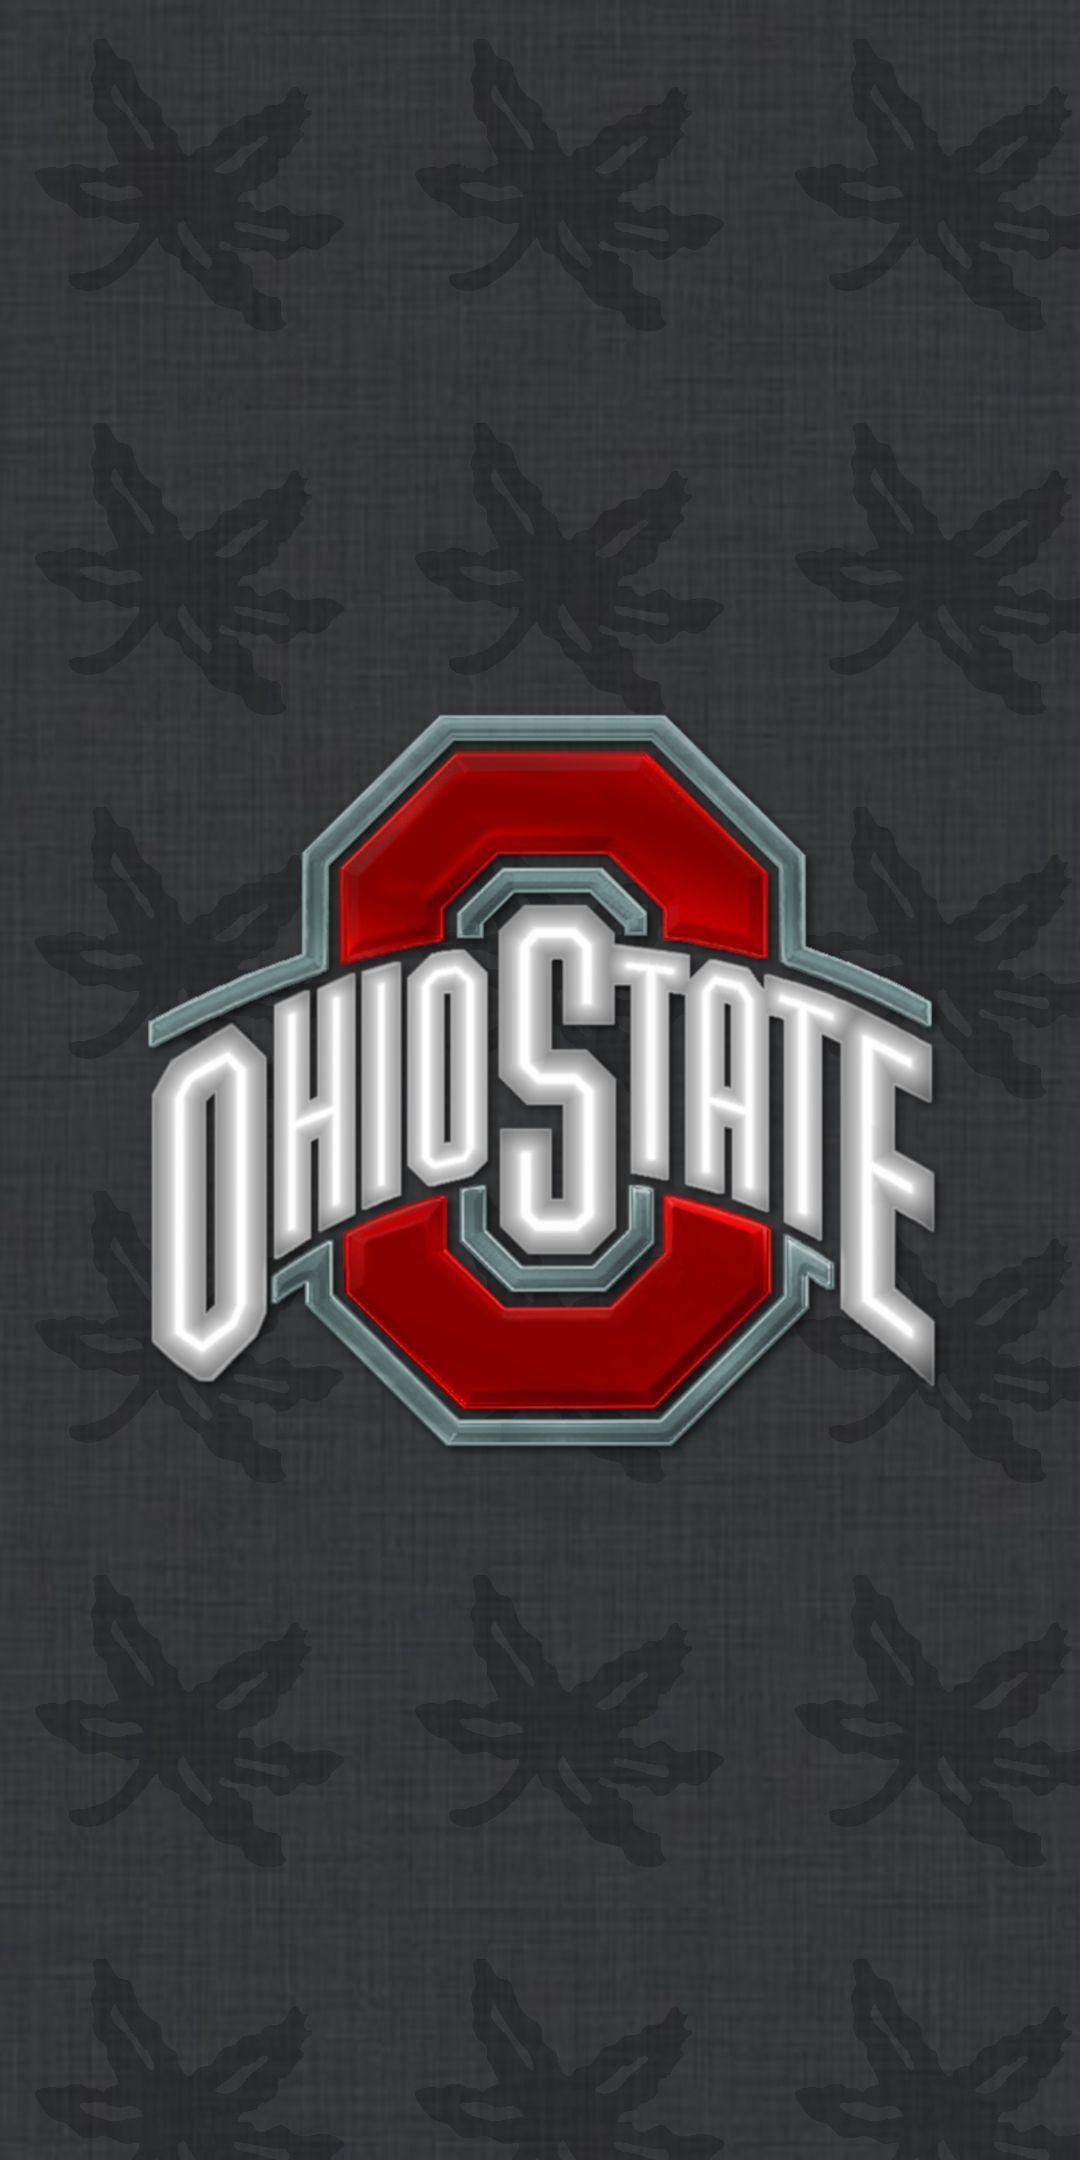 Ohio State Football Wallpapers - Top